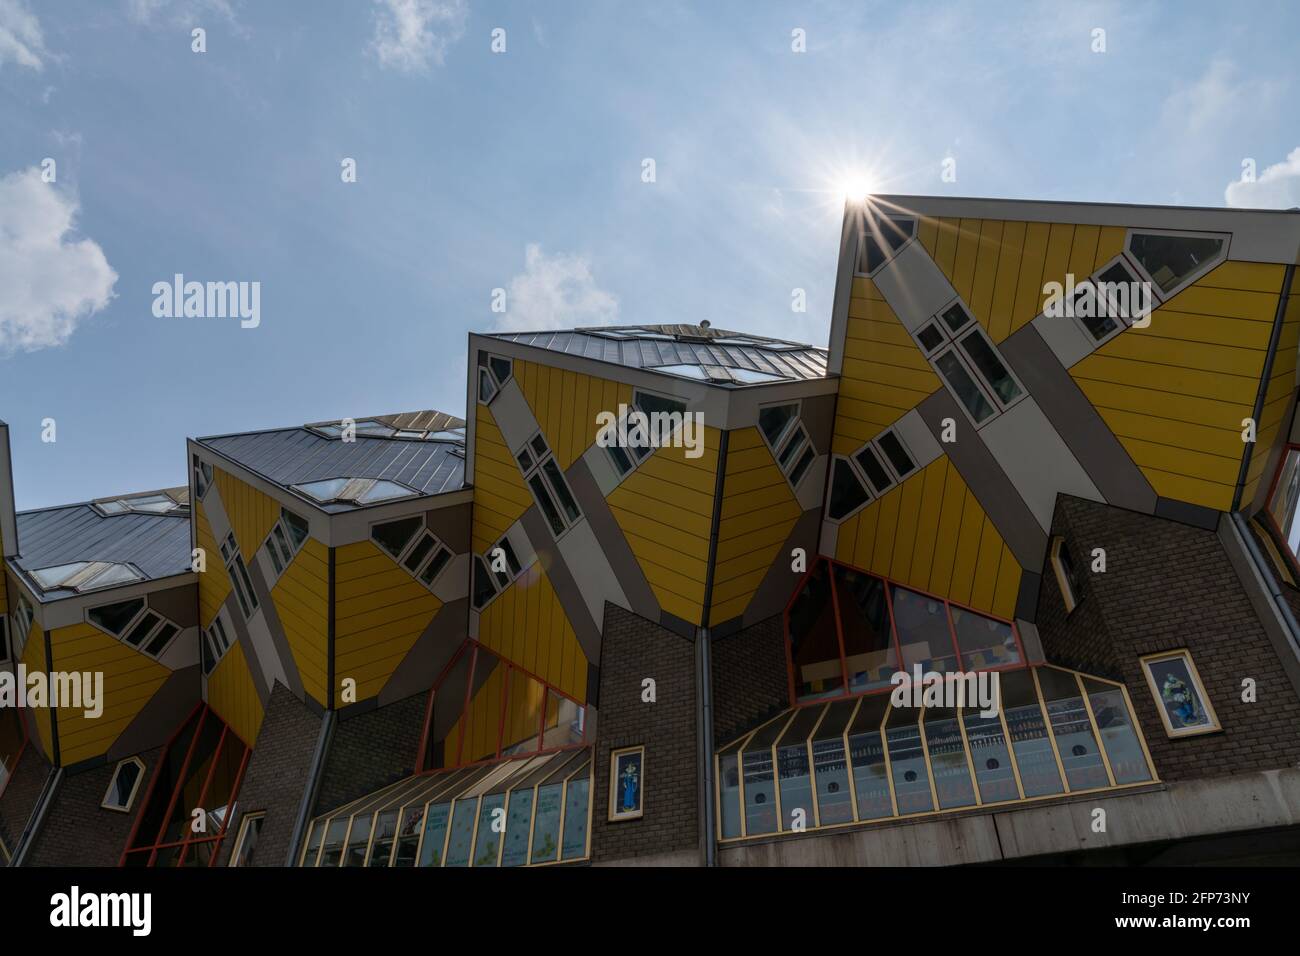 Rotterdam, Netherlands - 14 May, 2021: the iconic yellow cube houses in the city center of Rotterdam Stock Photo